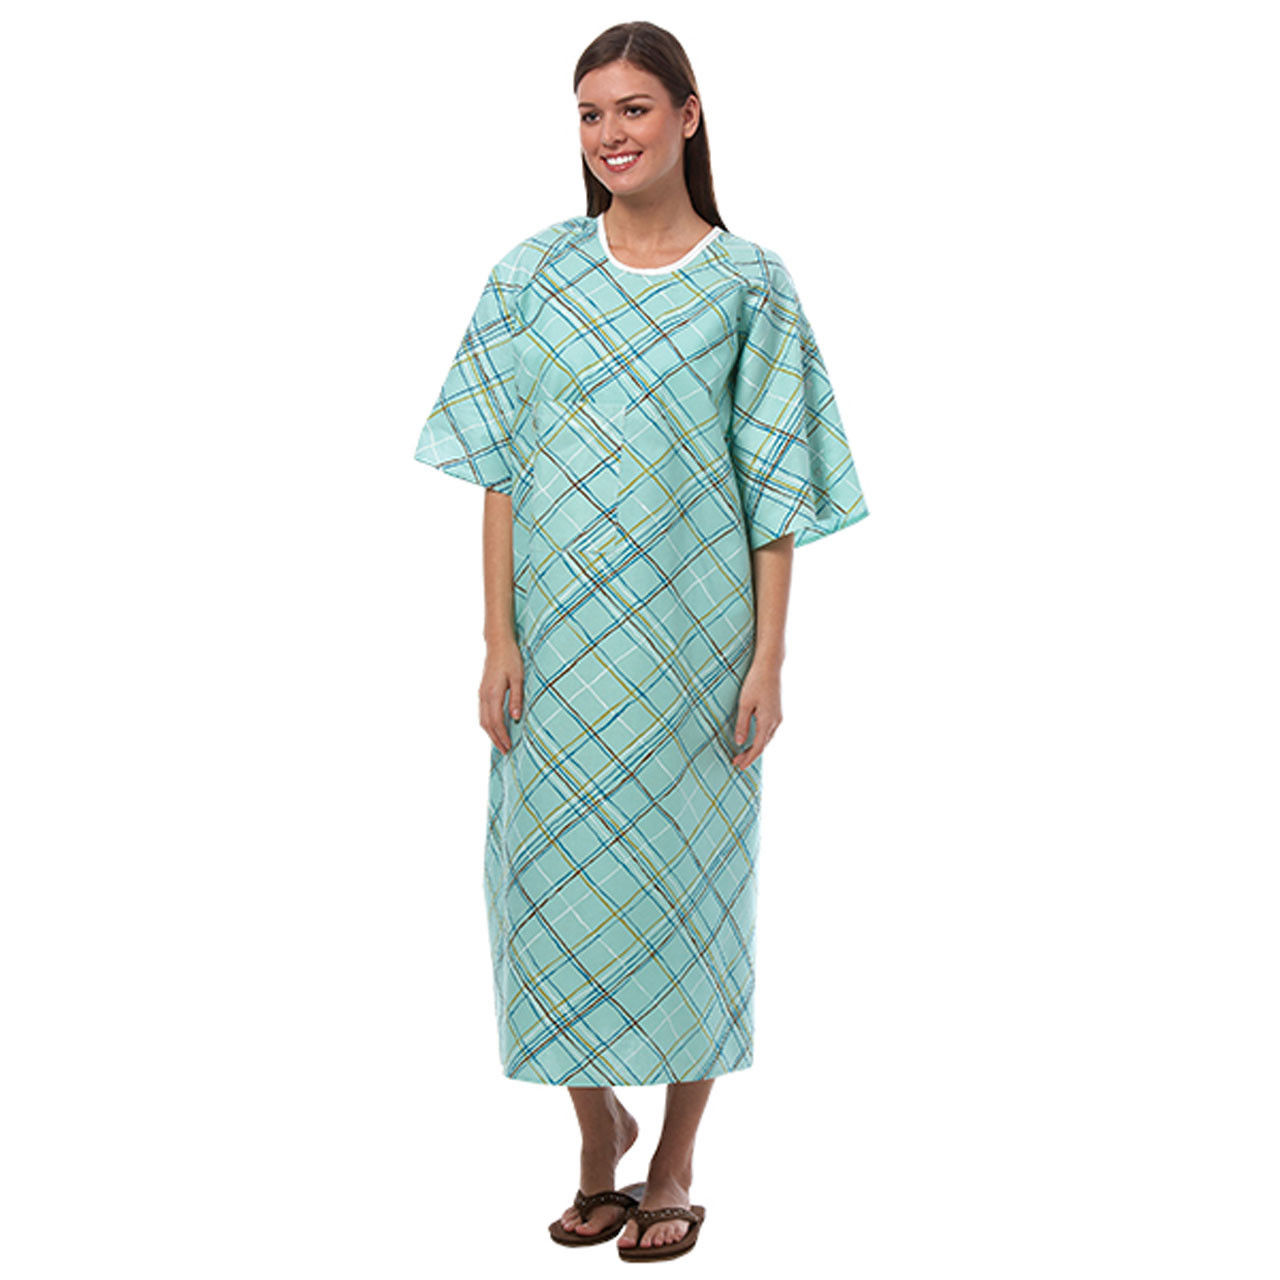 Do fashion hospital gowns ensure complete patient coverage?